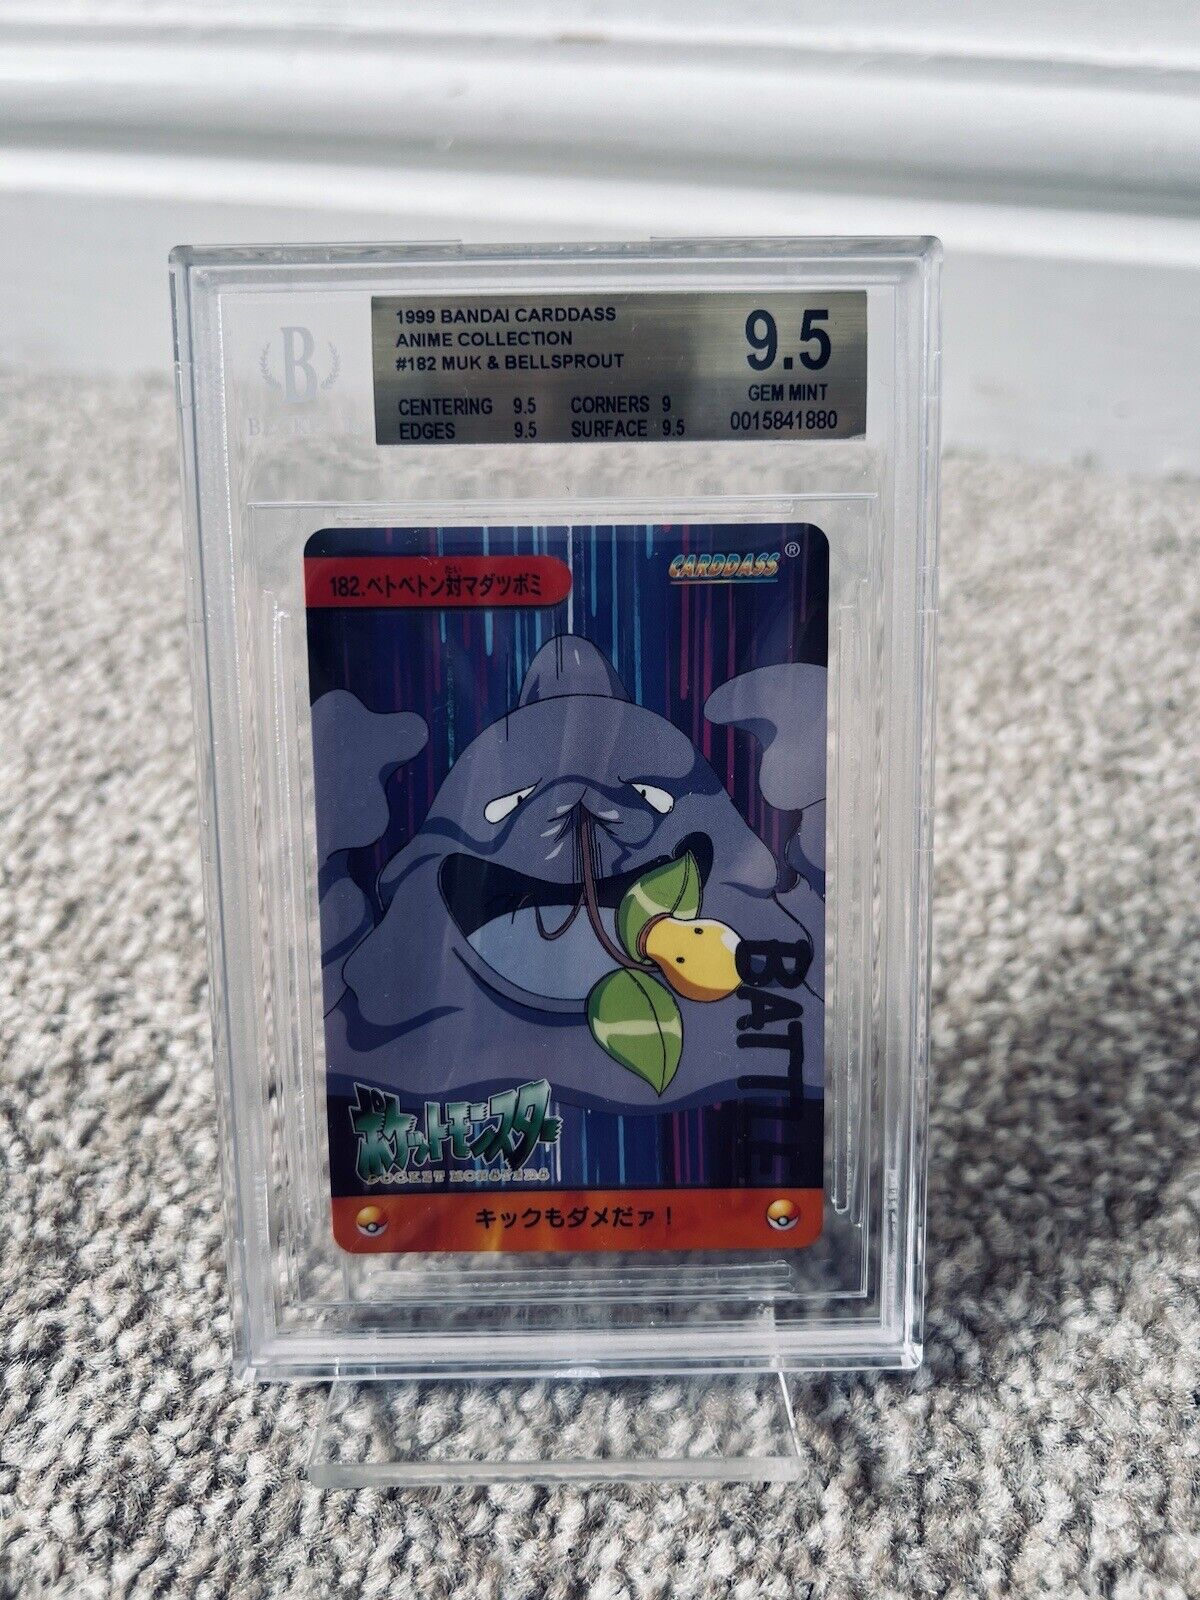 BGS 9.5 - 1999 Bandai Carddass Anime Collection #182 Muk & Bell-Sprout